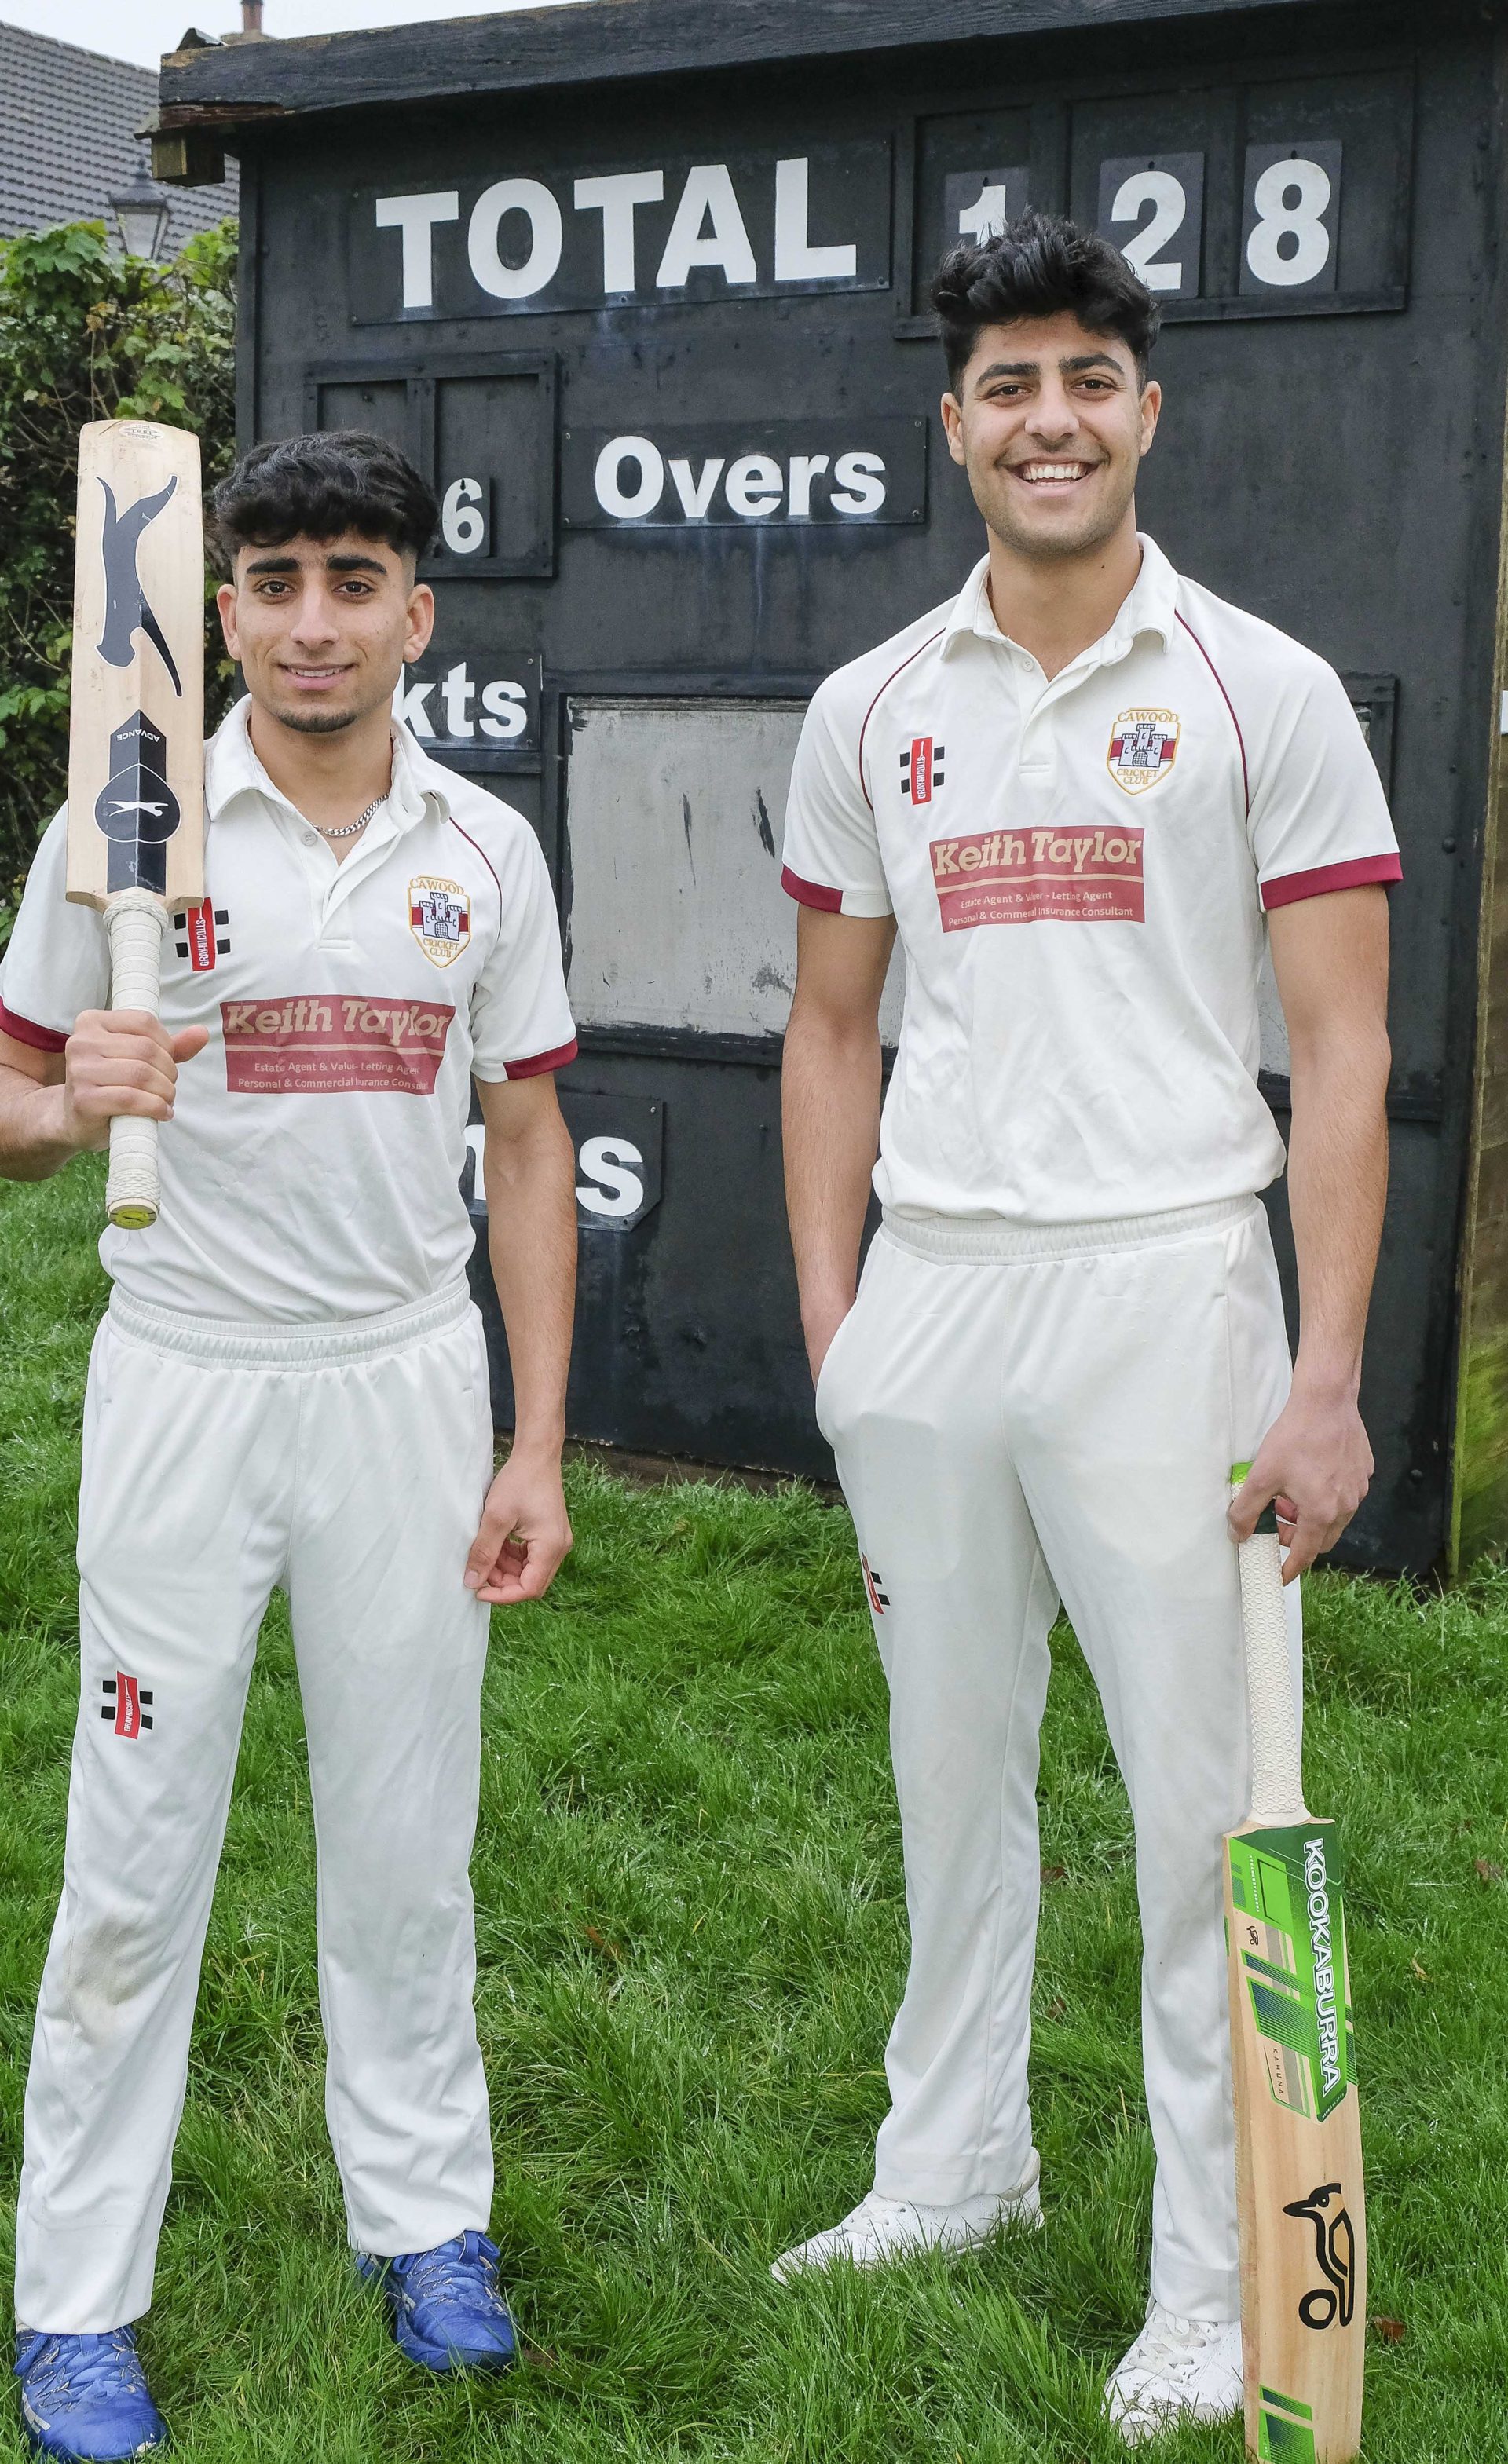 Cawood cricketers 1 Afghan refugees' love of cricket helps to inspire their new lives